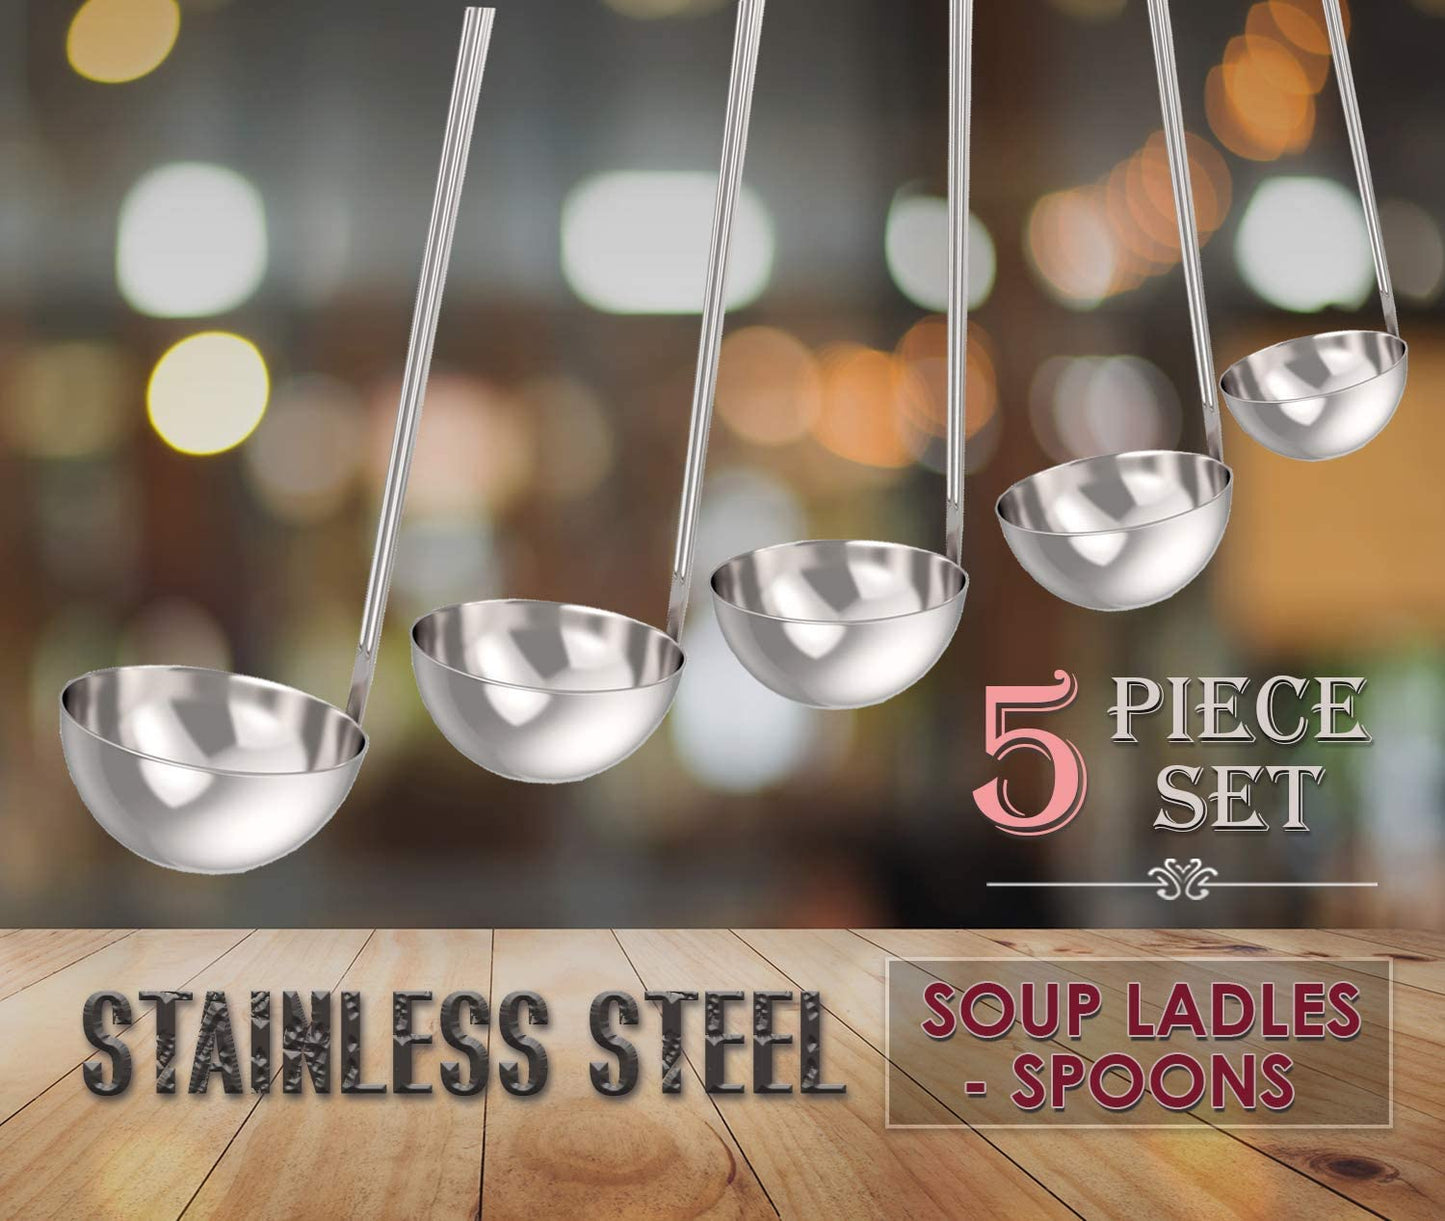 MFW Soup Ladle and Ladle Spoon Set of 5 - Includes 0.5 oz, 2oz, 4oz, 6oz and 8oz ladles and Spoons, Made from Stainless Steel, Small Ladled and Big Spoon Sizes.